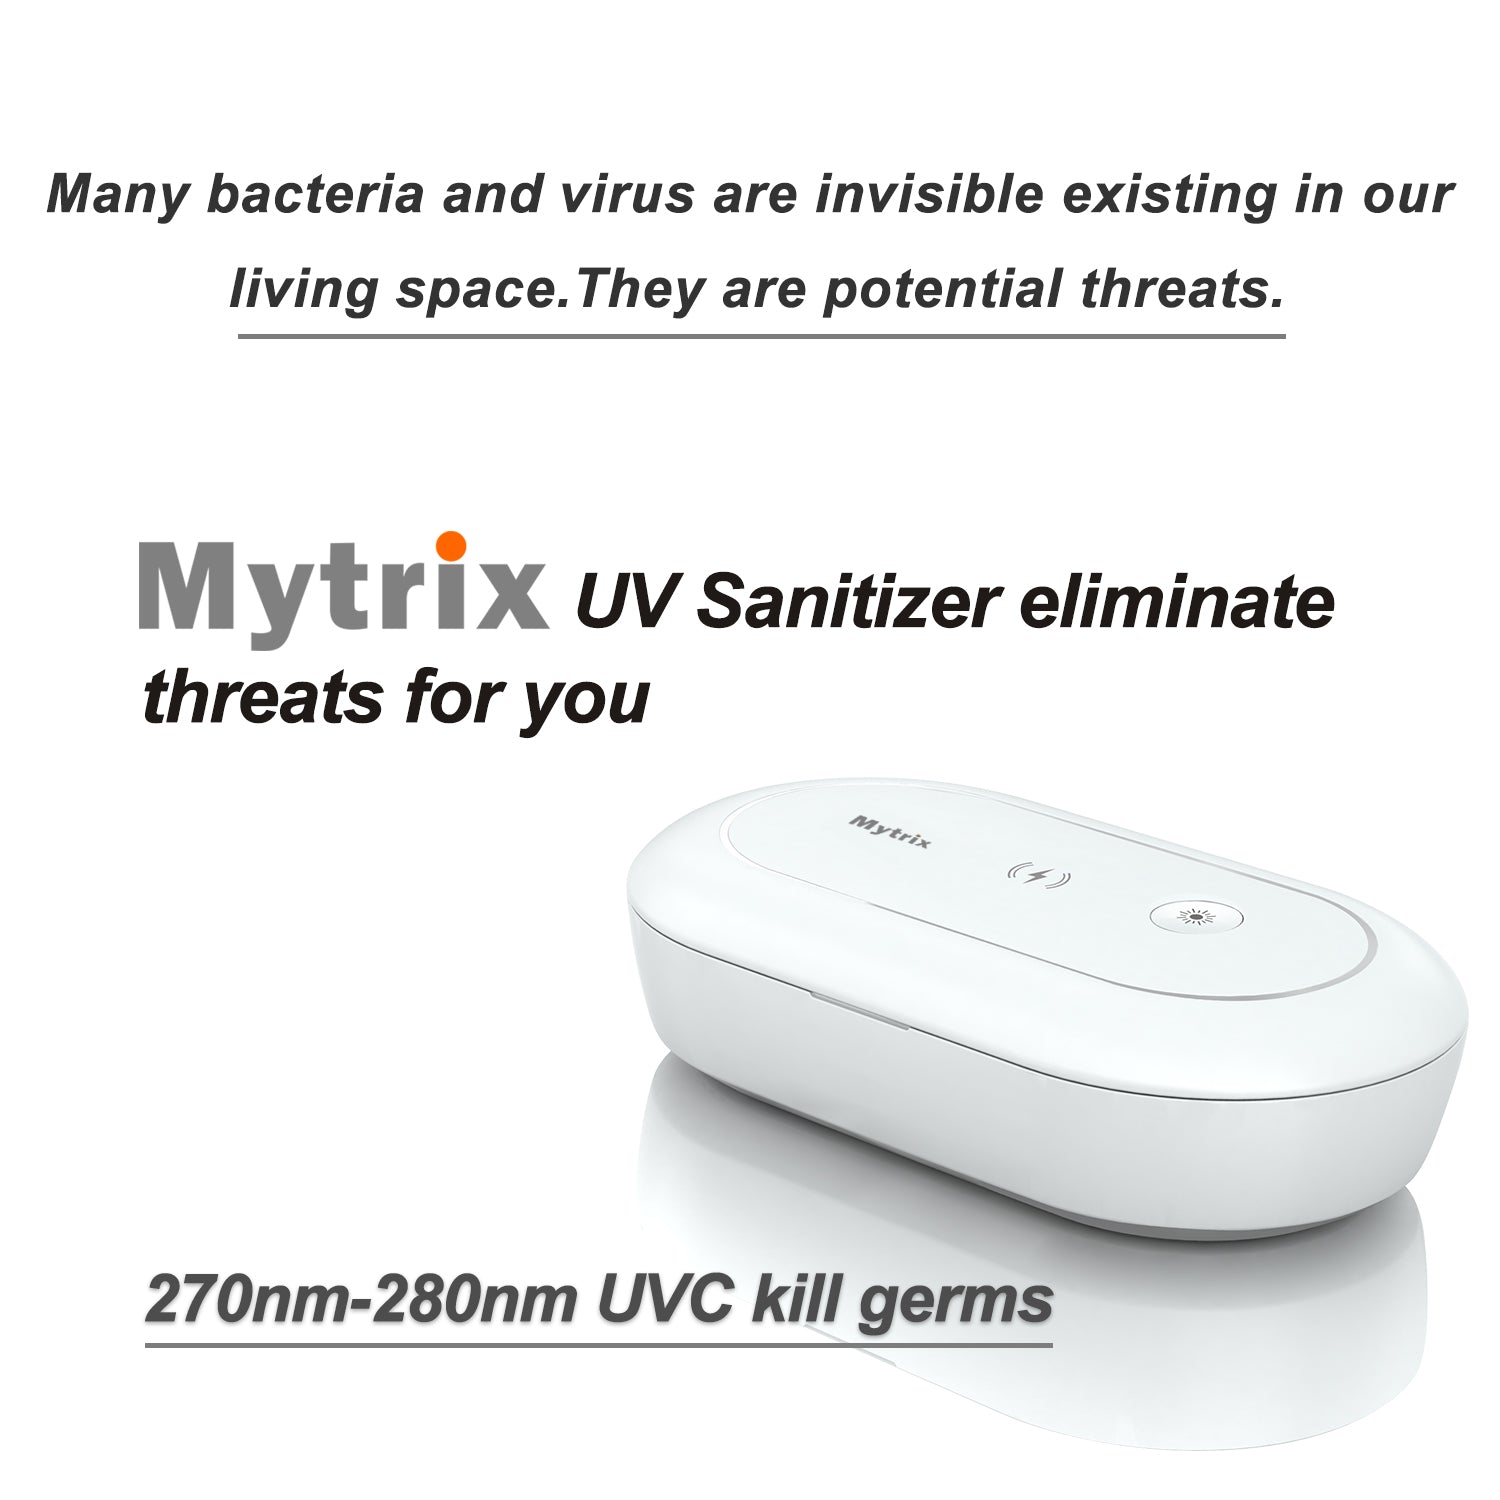 Mytrix Portable UV Sterilizer Box, Ozone Sanitization, Wireless Fast Charging Box with Aroma Diffuser, Multi-functional Box for Smart Phone, Jewelry, Glasses, Watches, 2 year Warranty